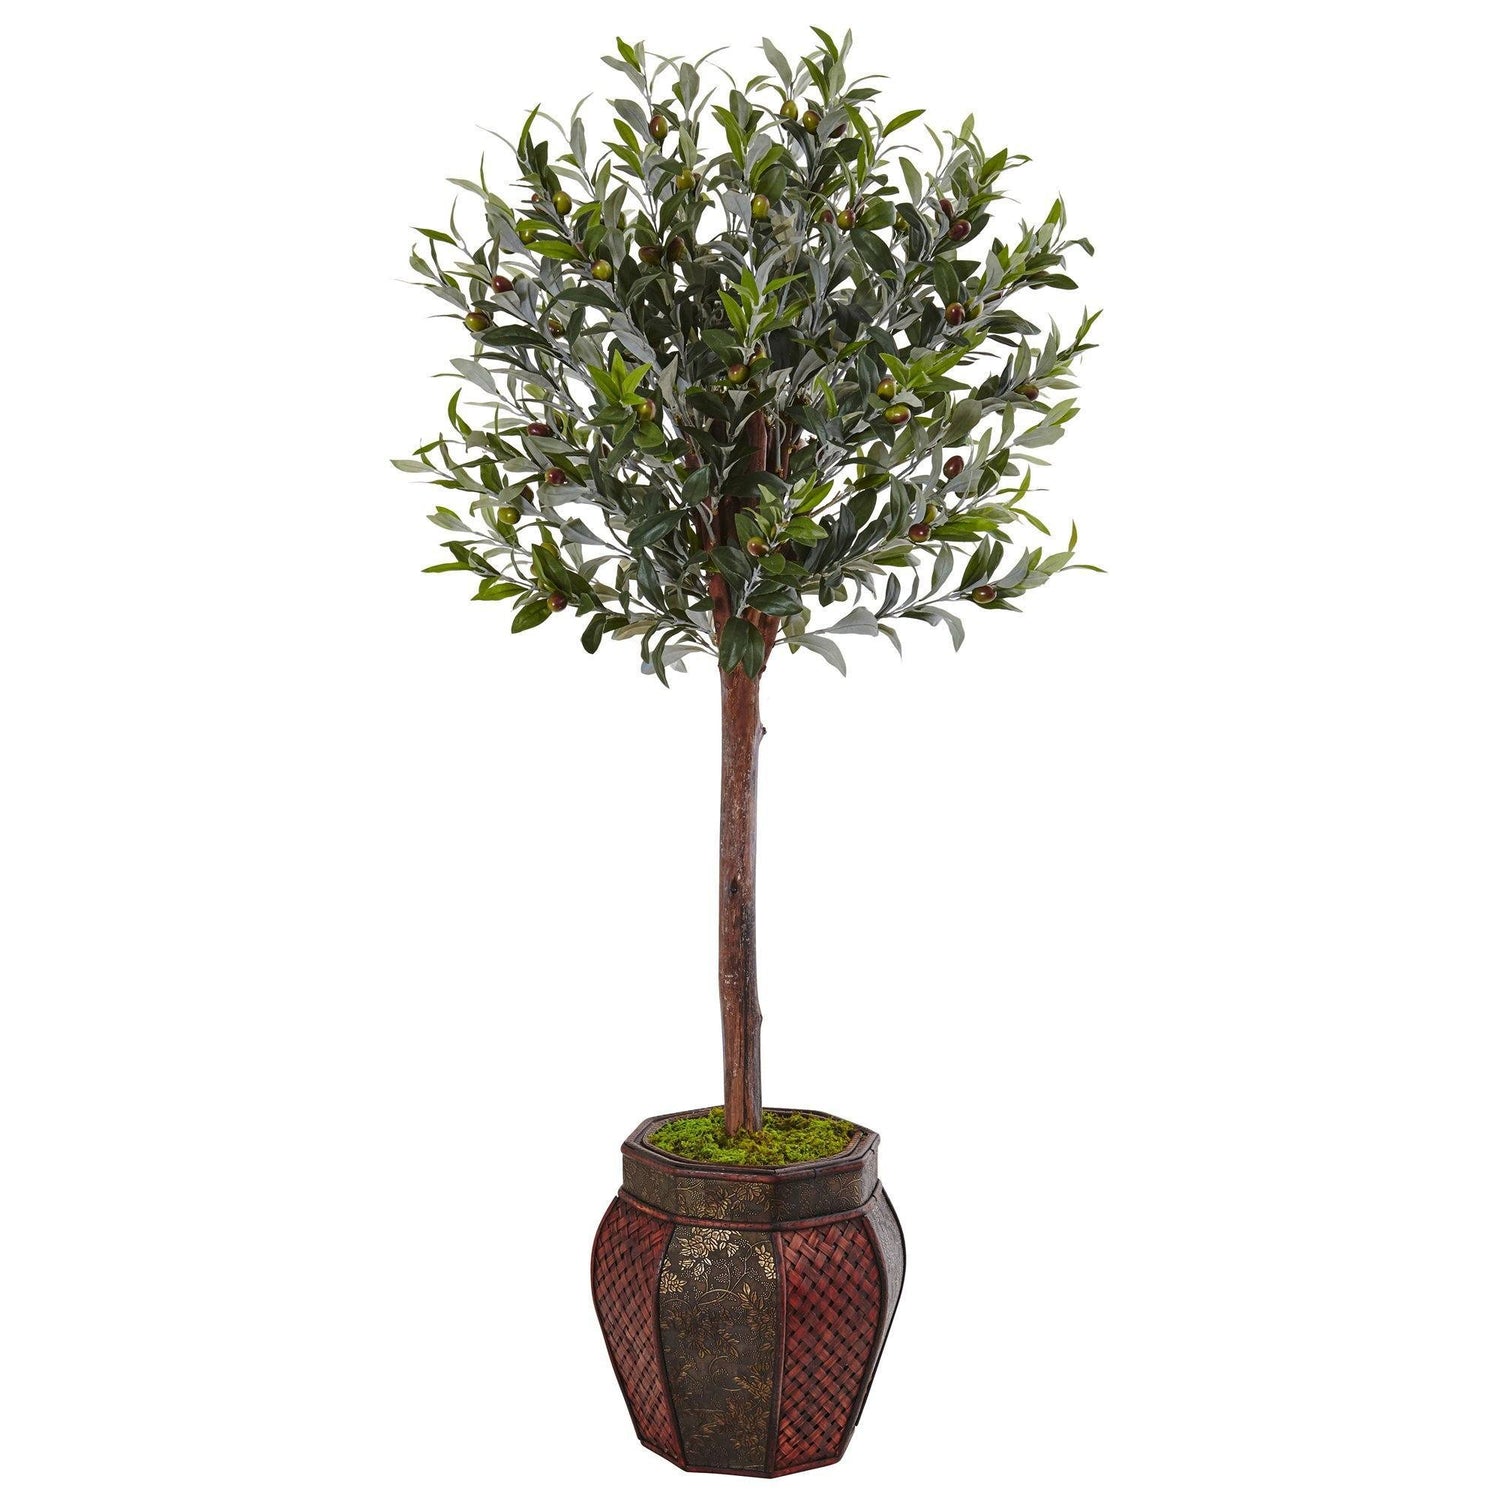 4.5’ Olive Topiary Tree in Weave Panel Planter